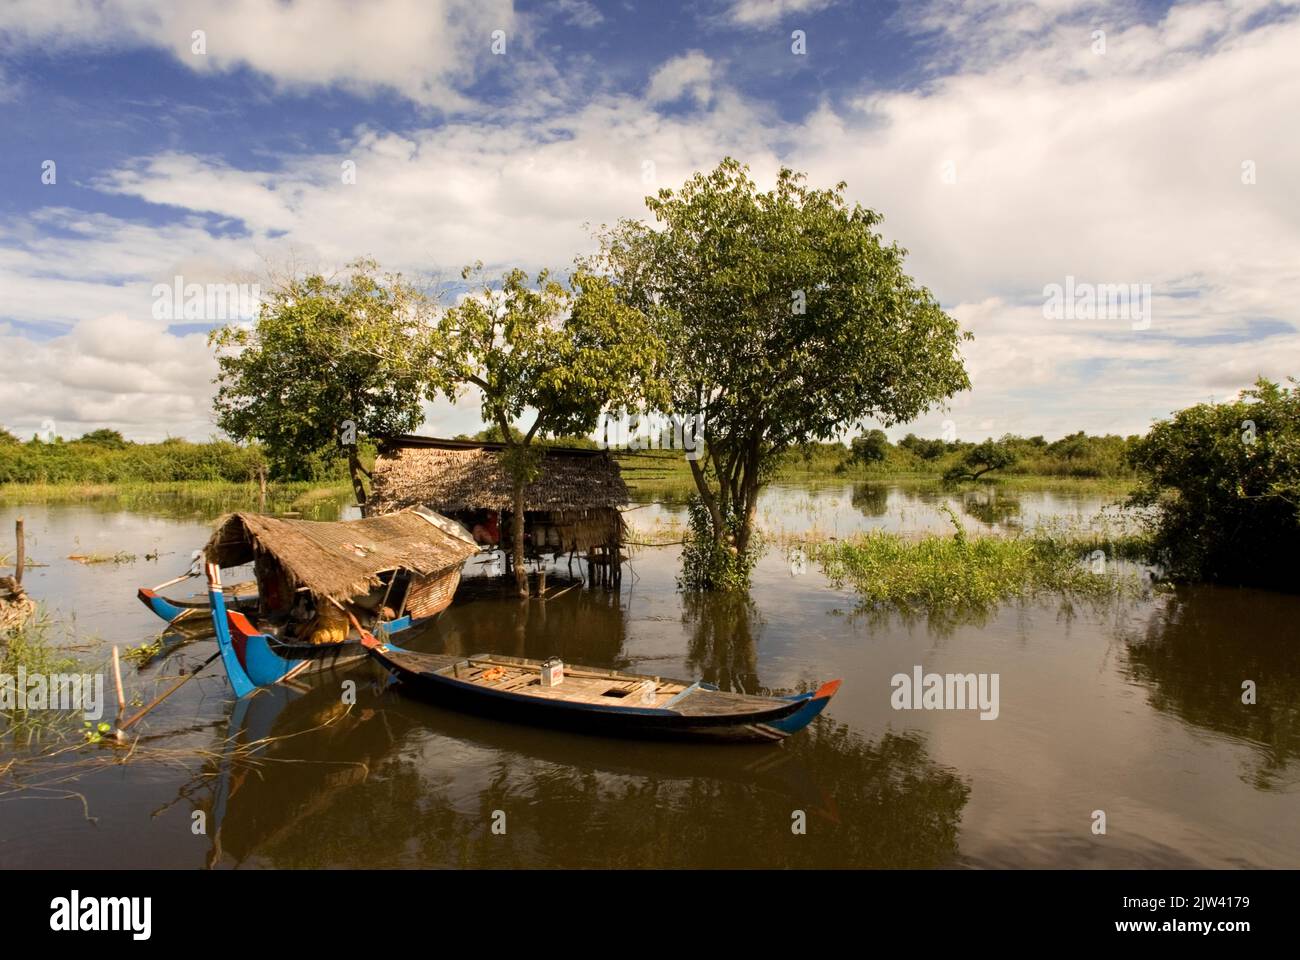 Boats on the Sangker River. Journey from Battambang to Siemp Reap, Cambodia.   The drought in the largest lake in Cambodia puts the life of fish and f Stock Photo